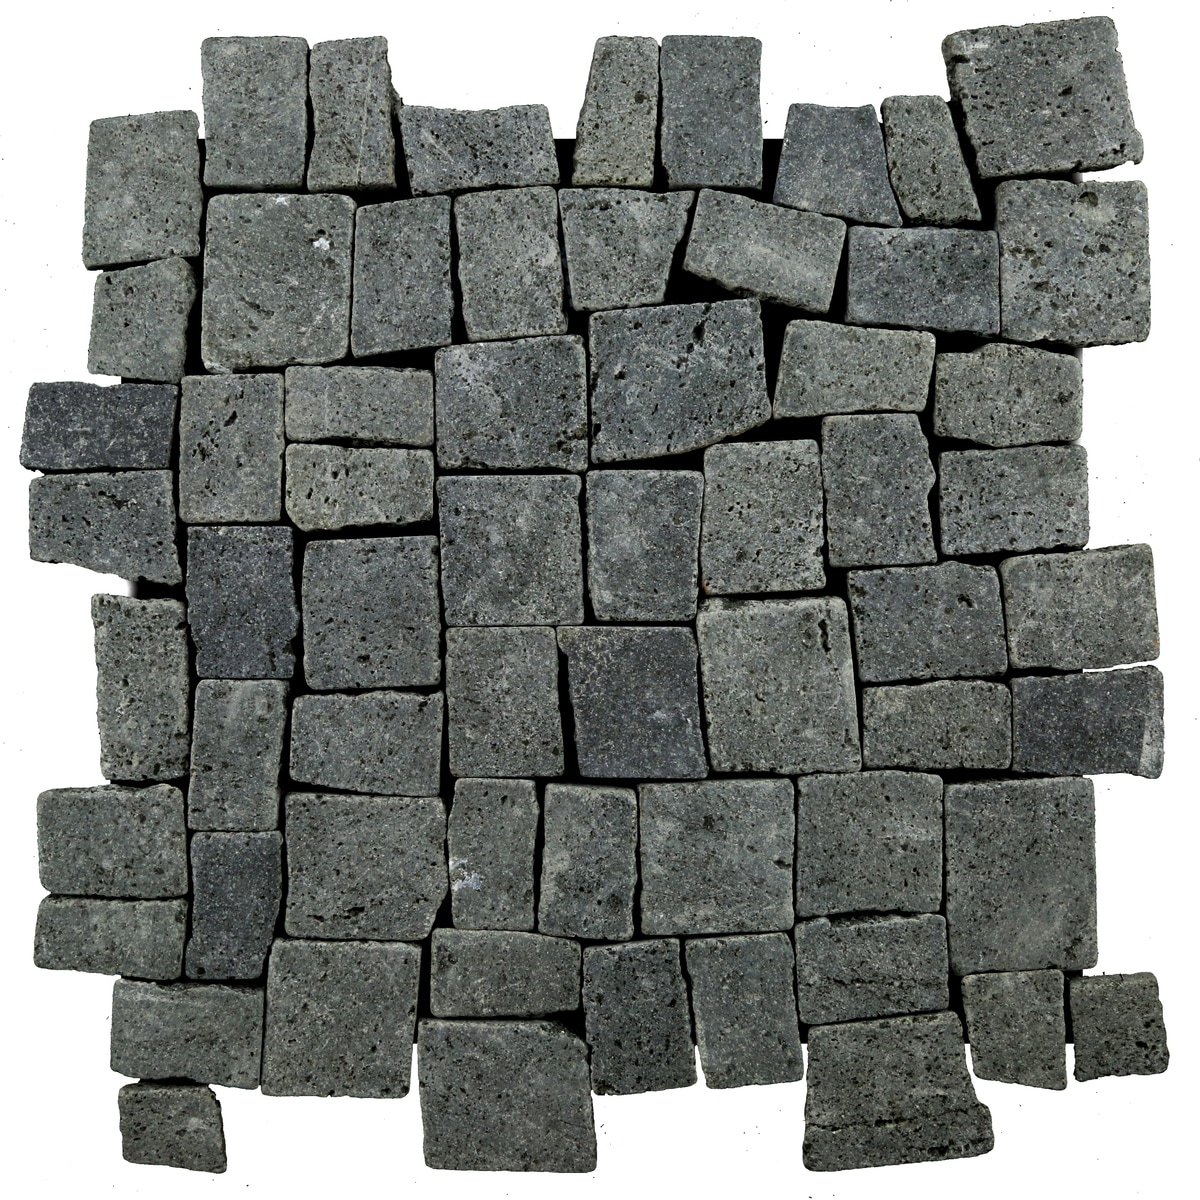 Cobblestone Black Acoustical Cork Wall Tiles with PSA Backing